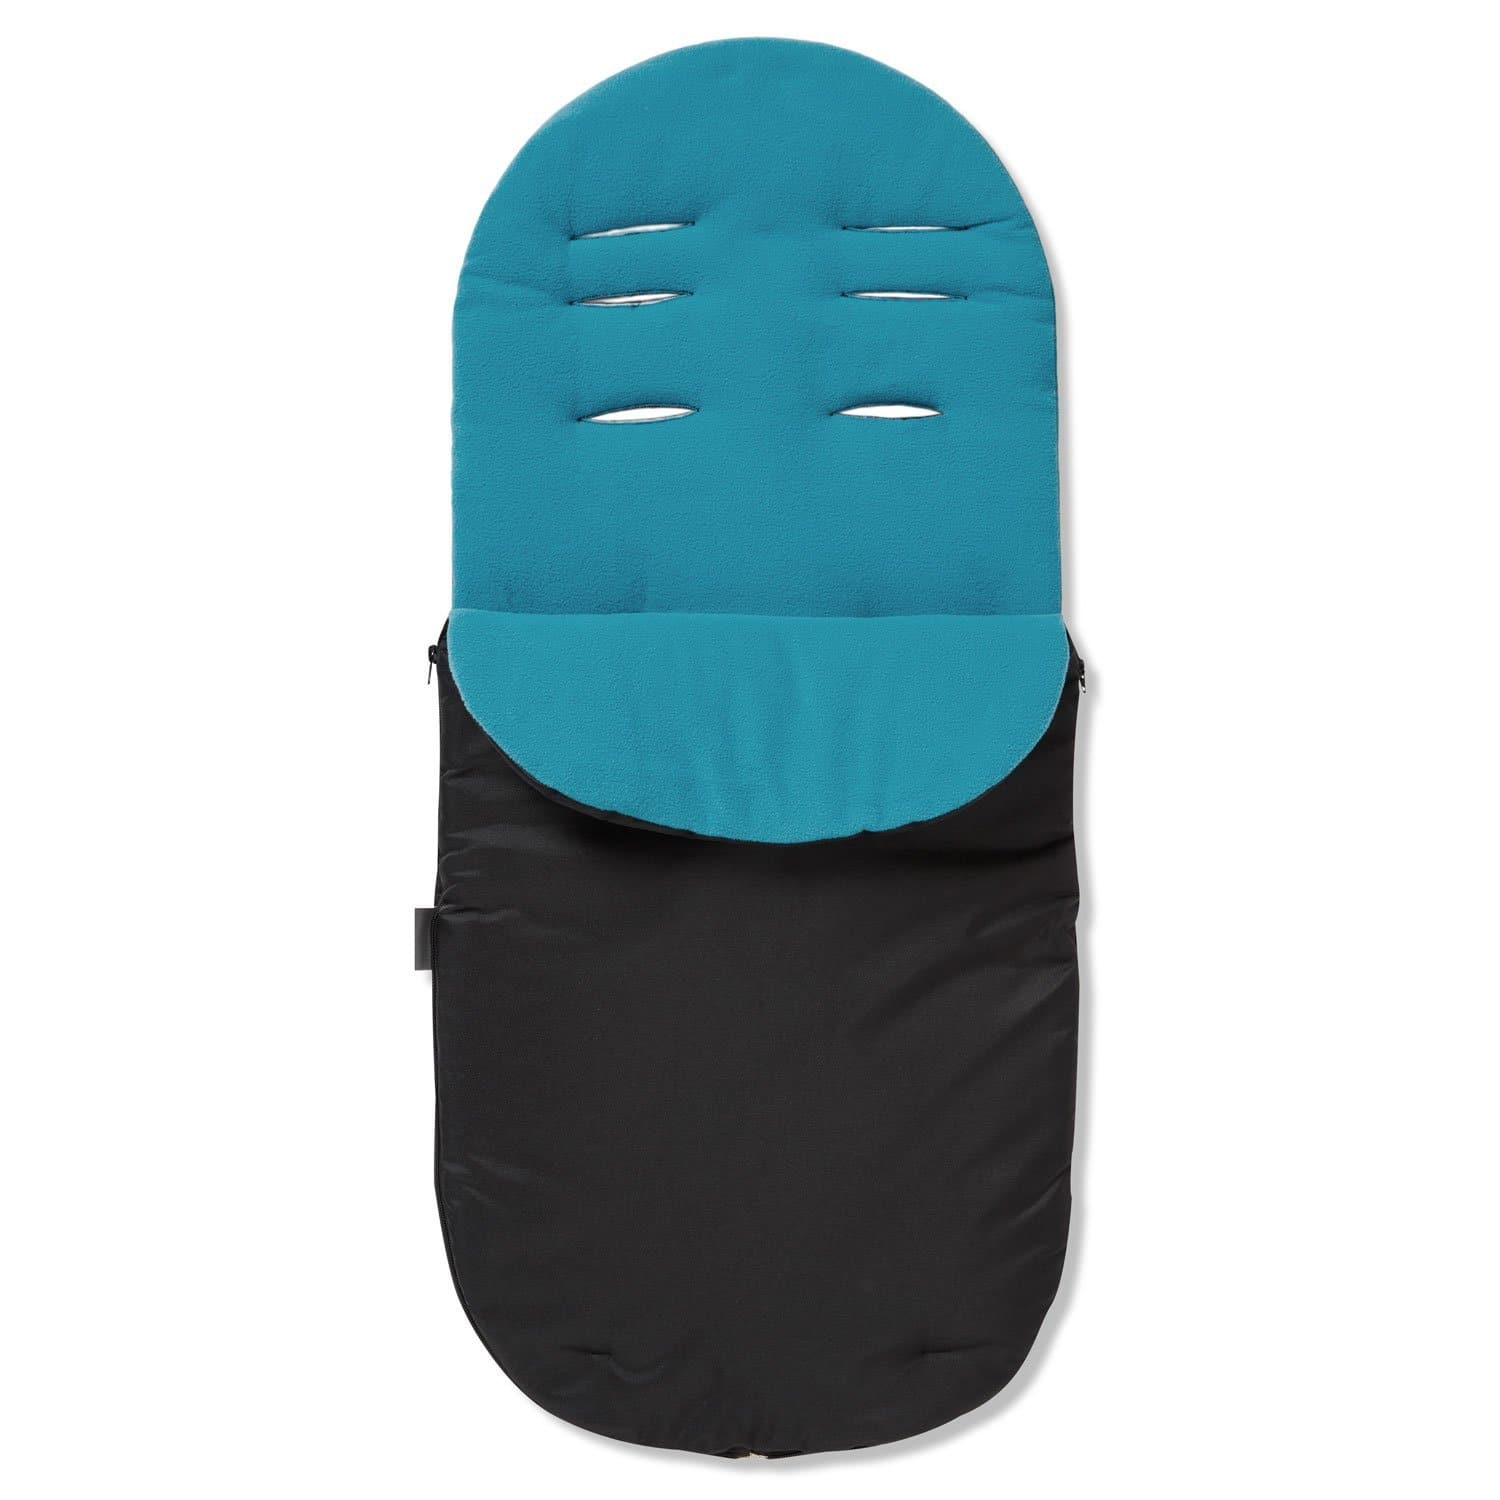 Footmuff / Cosy Toes Compatible with Babylo - Turquoise / Fits All Models | For Your Little One